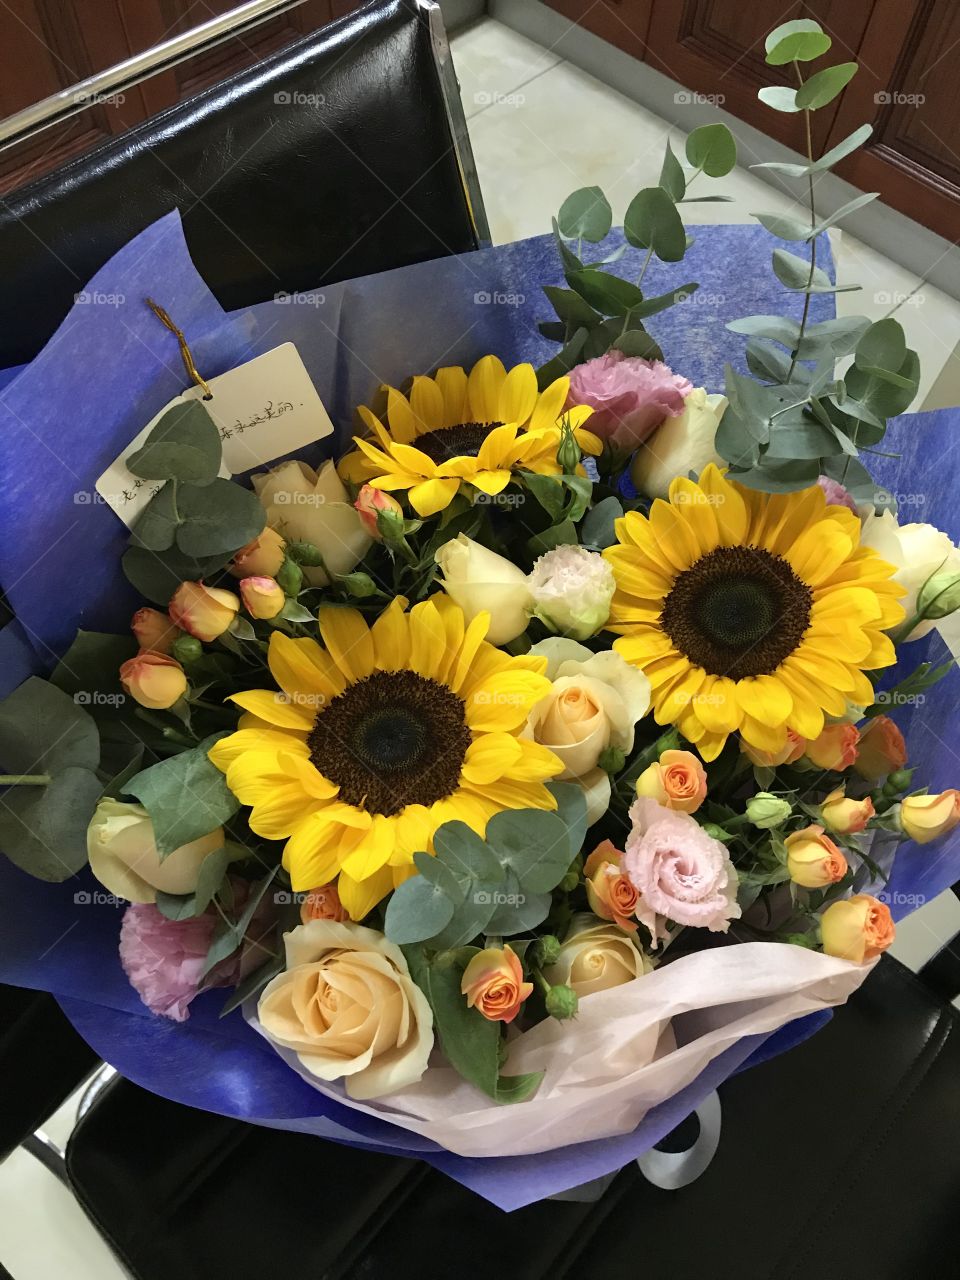 Bunch of sunflowers and roses for gift 